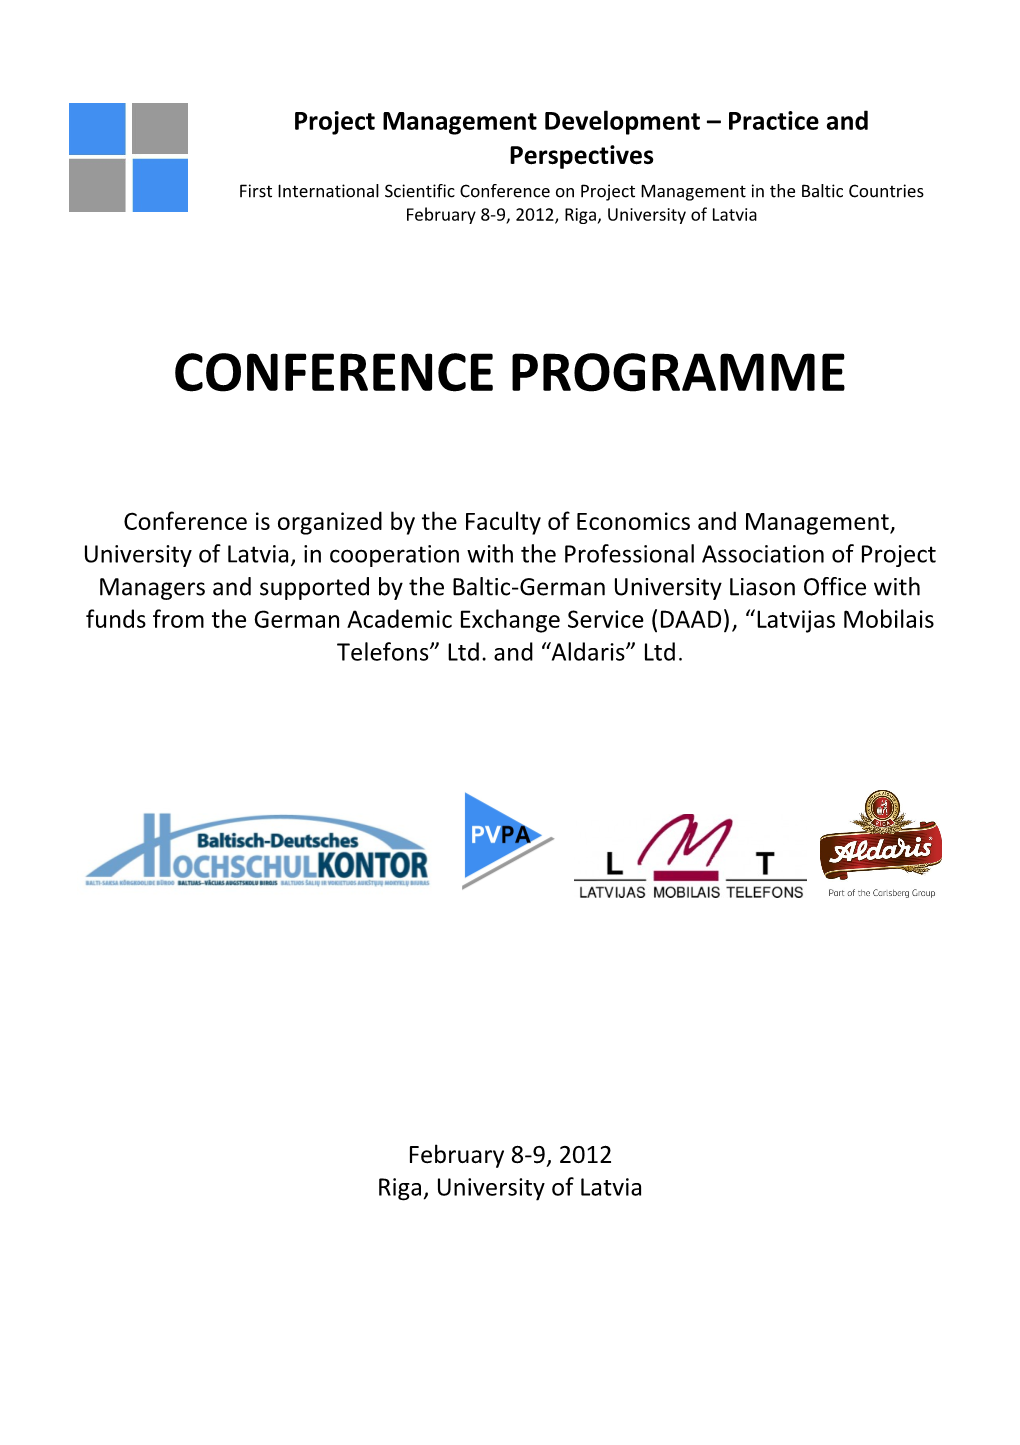 Conference Programme s1